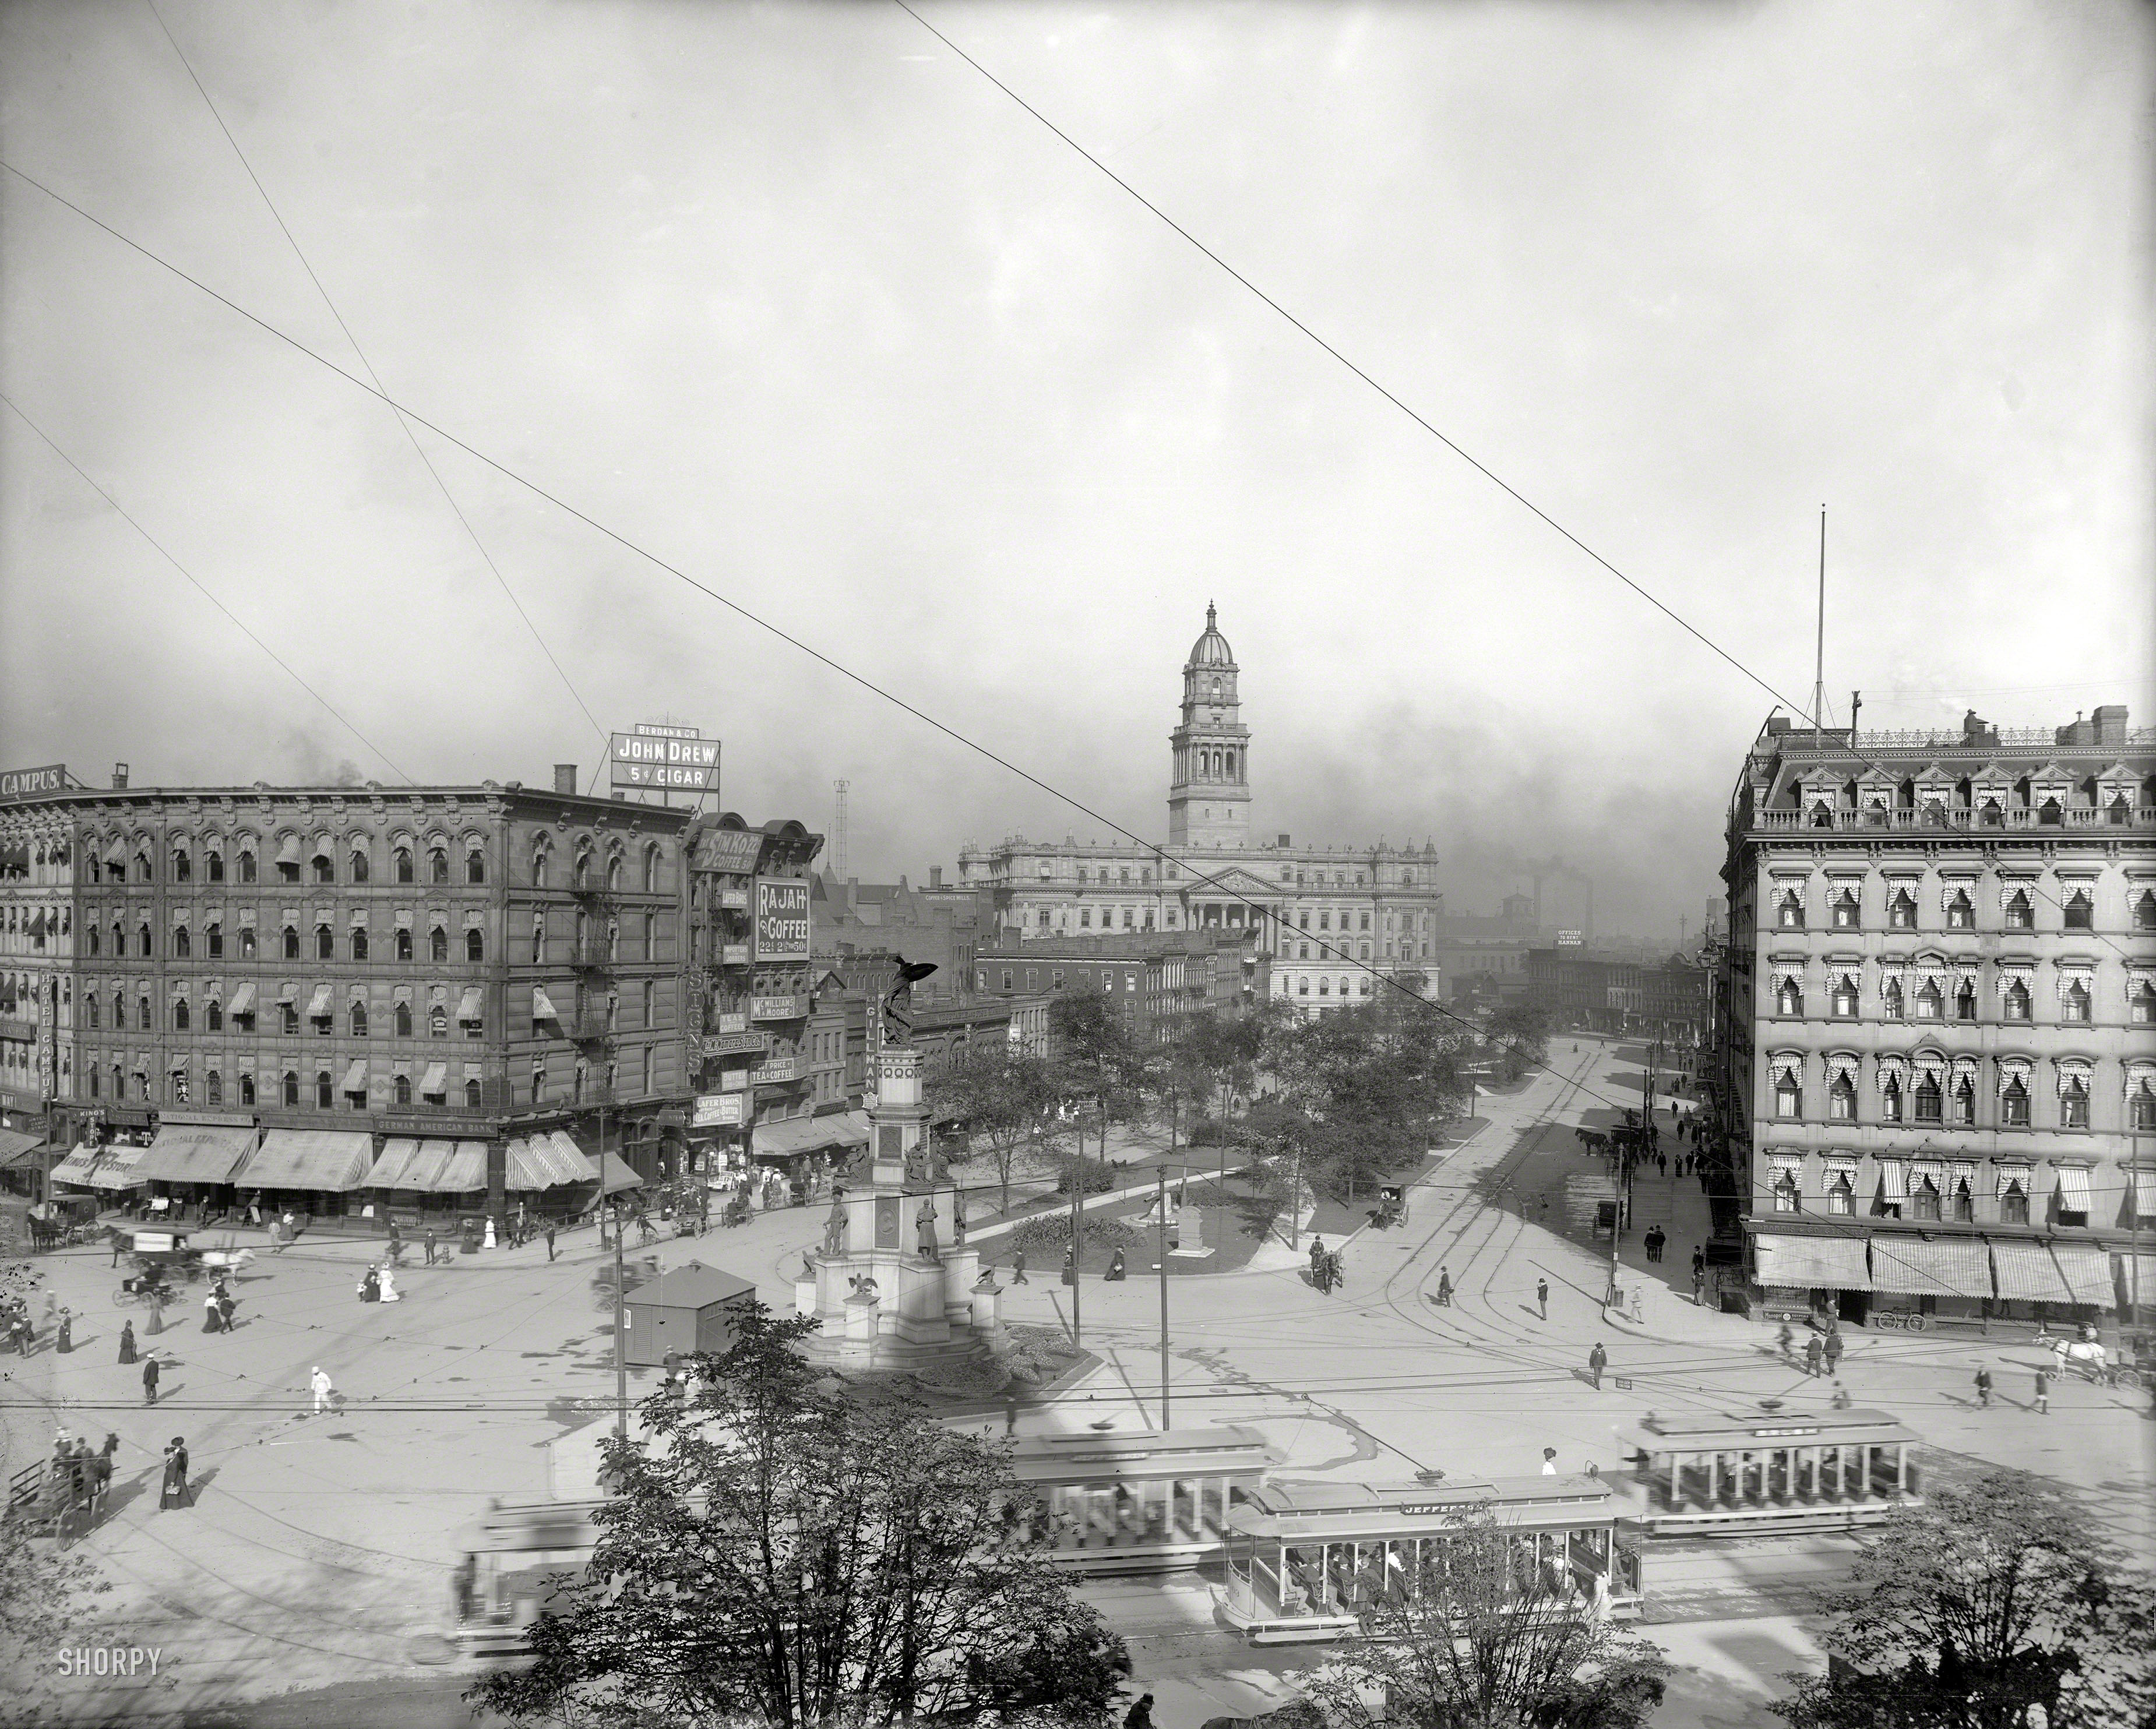 Detroit circa 1902. "Cadillac Square and Wayne County building." The rigging is for one of the "moonlight tower" arc lamps that provided nighttime illumination, an example of which can be seen behind the Rajah Coffee sign. View full size.